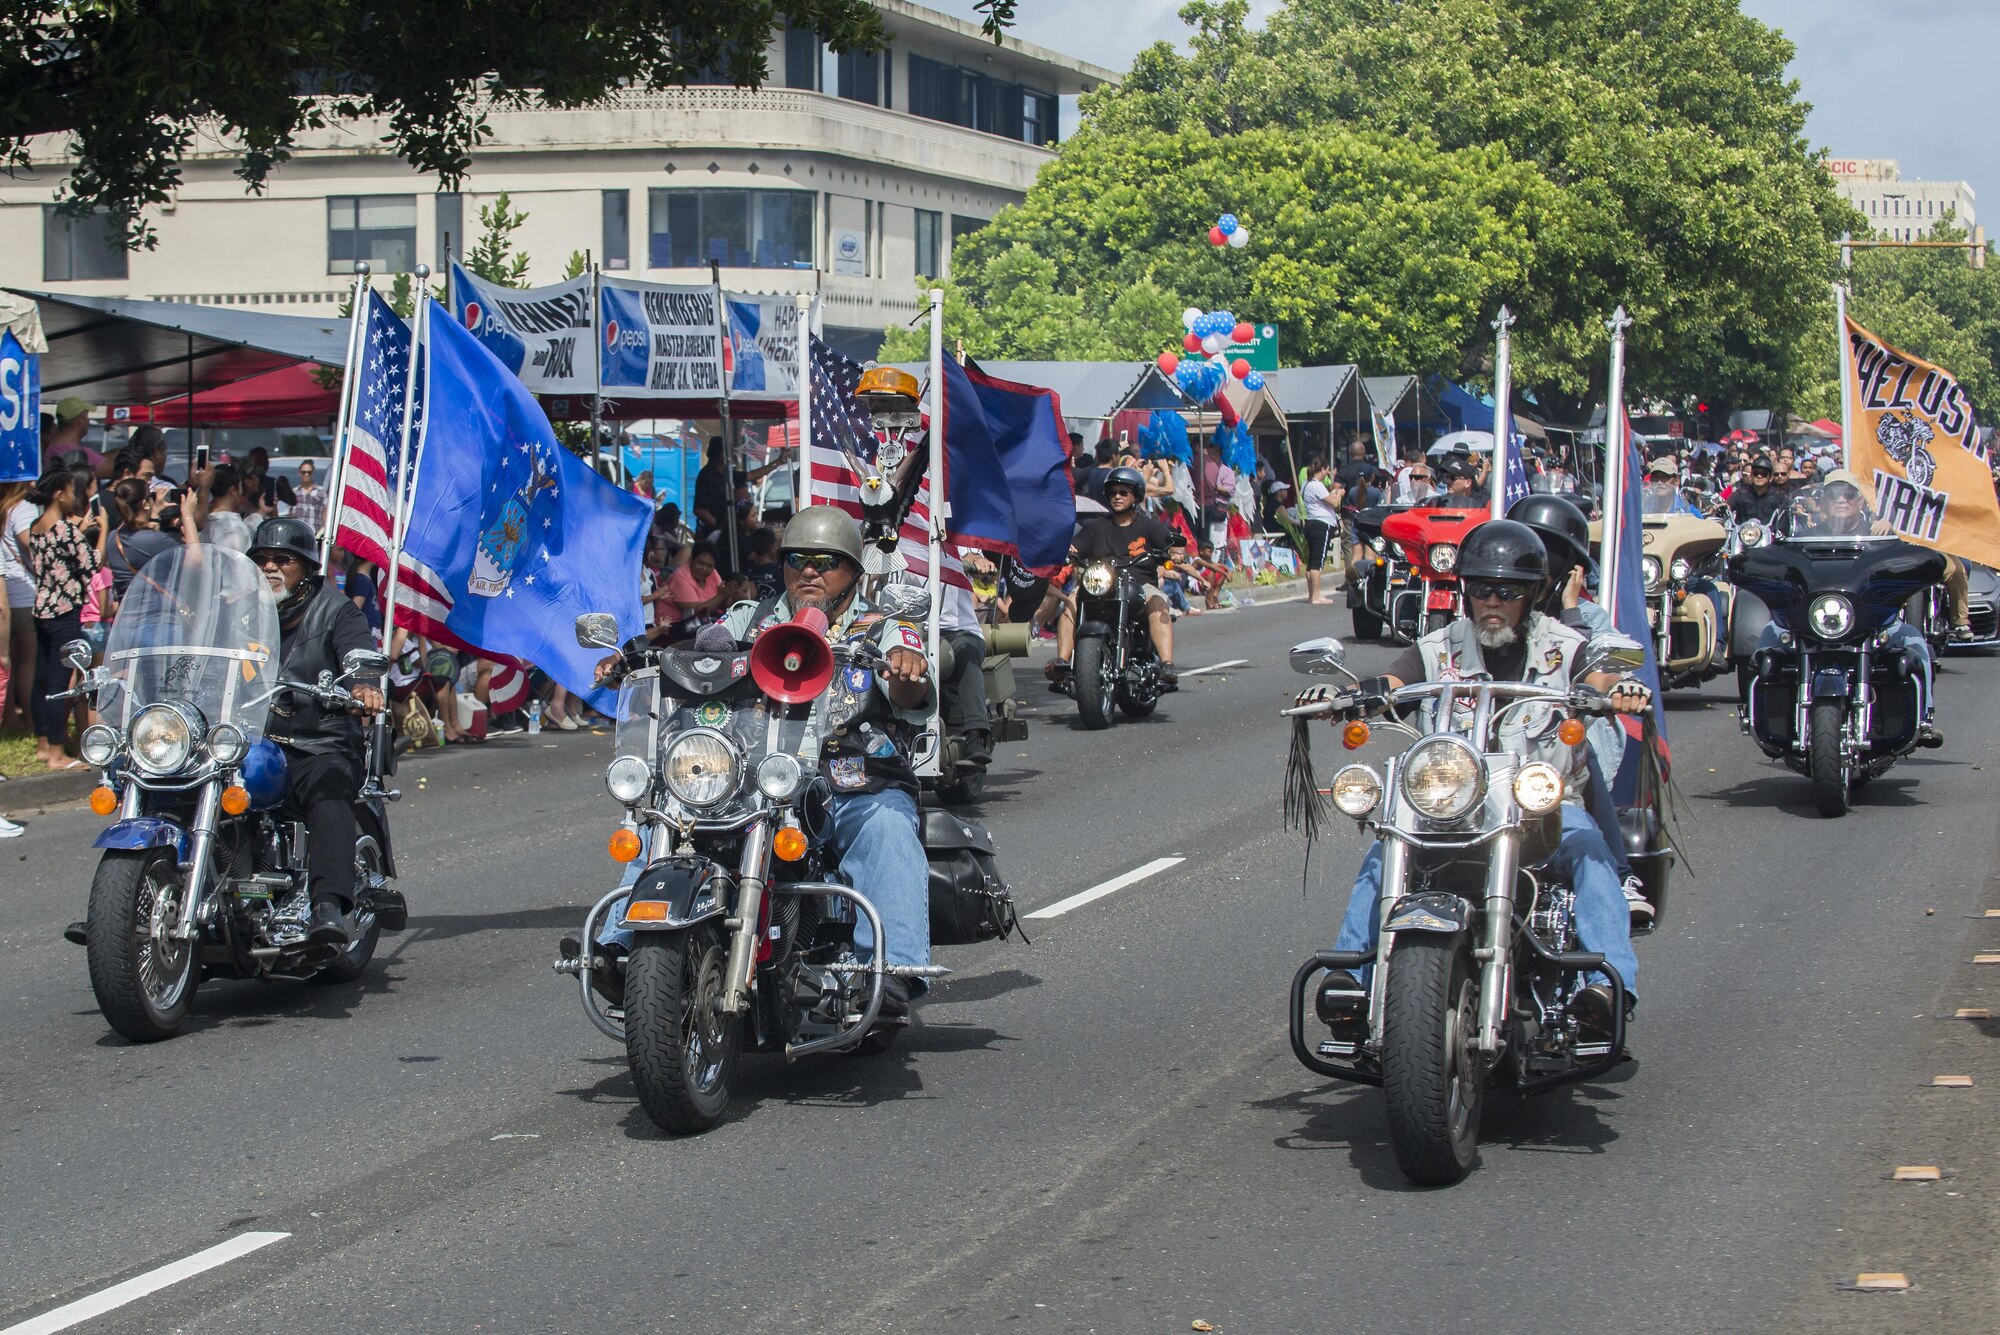 U.S Service members and local citizens participate in the 73rd Guam Liberation Day parade July 21, 2017, in Hagåtña, Guam. The parade commemorated 73 years since U.S. armed forces liberated the island from Japanese occupation. During World War II, Japan seized Guam on December 10, 1941, and on July 21, 1944, the U.S. armed forces liberated the island. (U.S. Air Force photo by Airman 1st Class Christopher Quail)